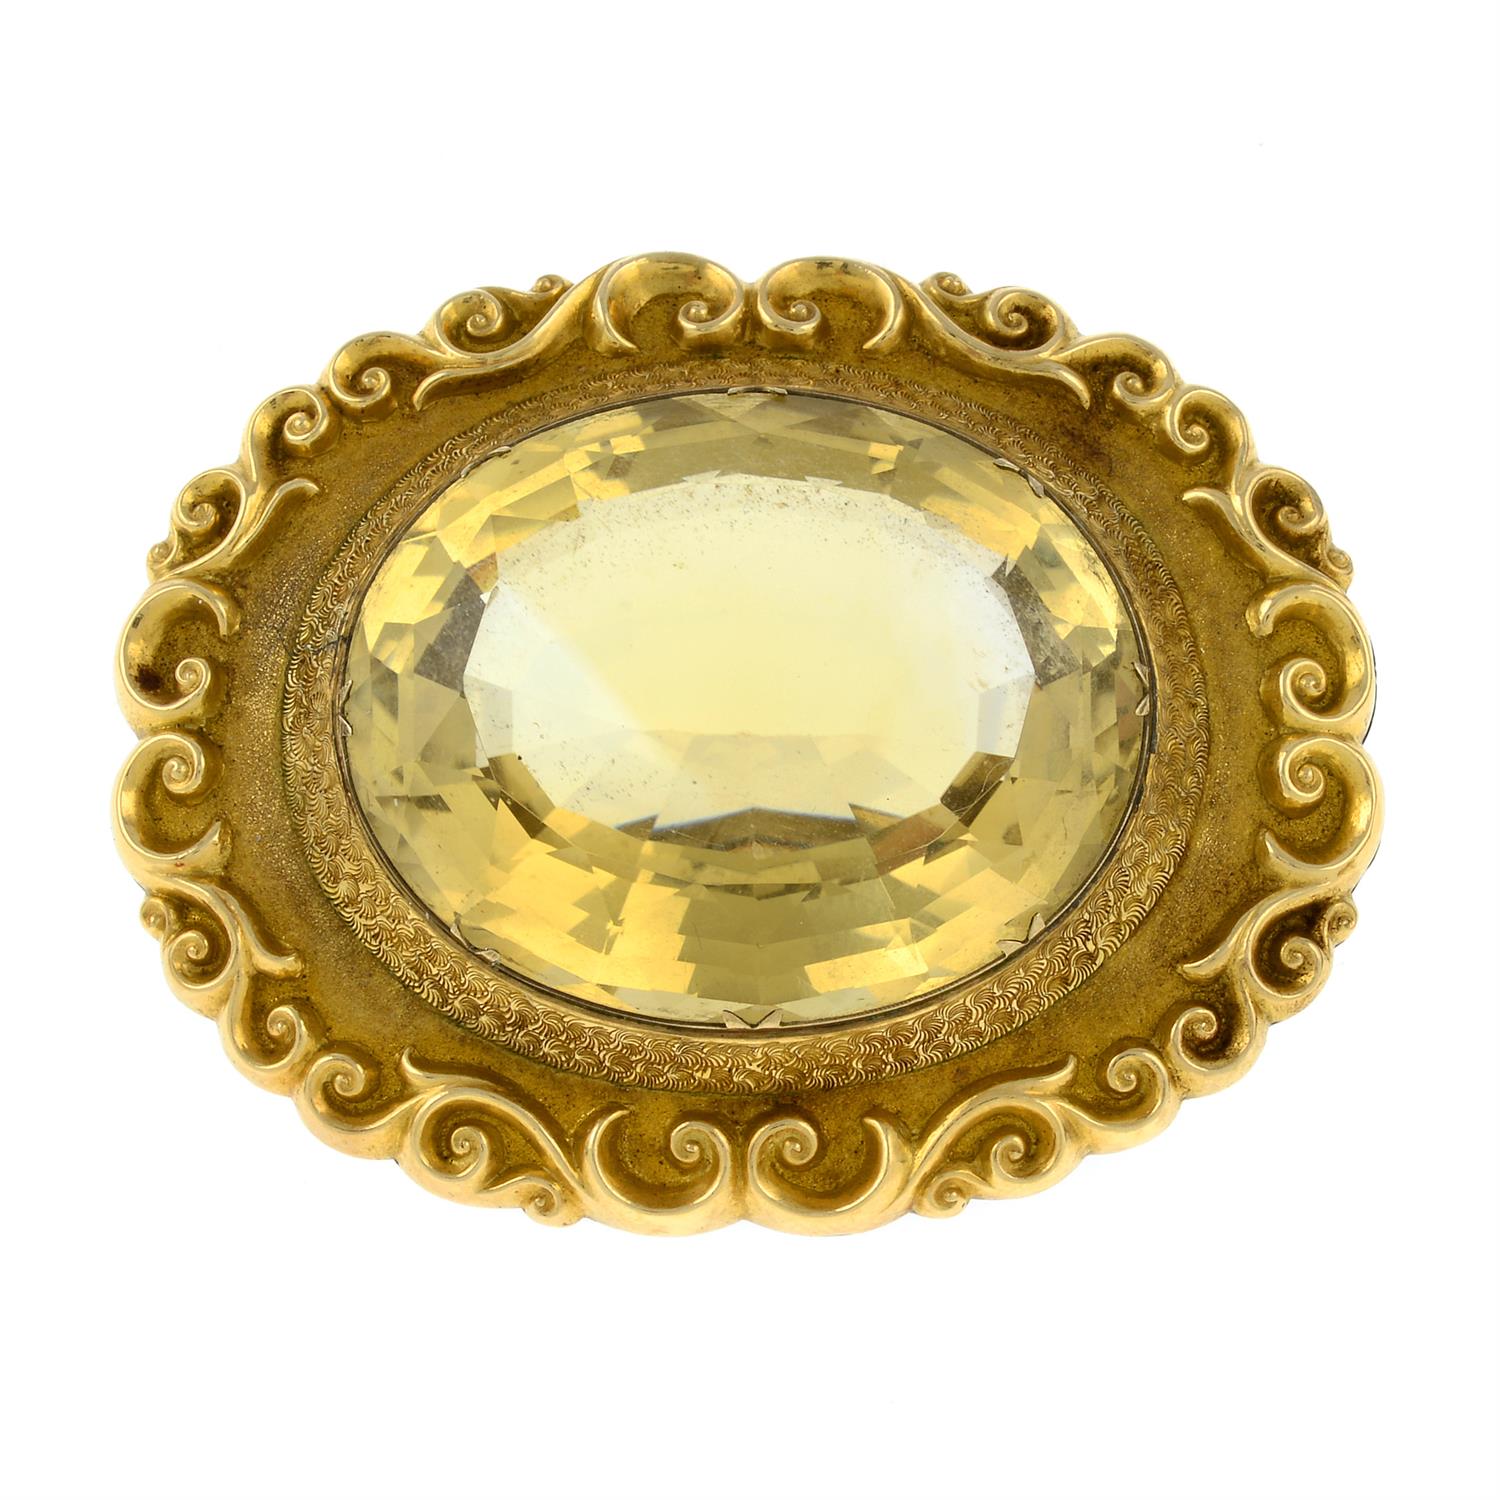 A late Victorian gold citrine brooch.